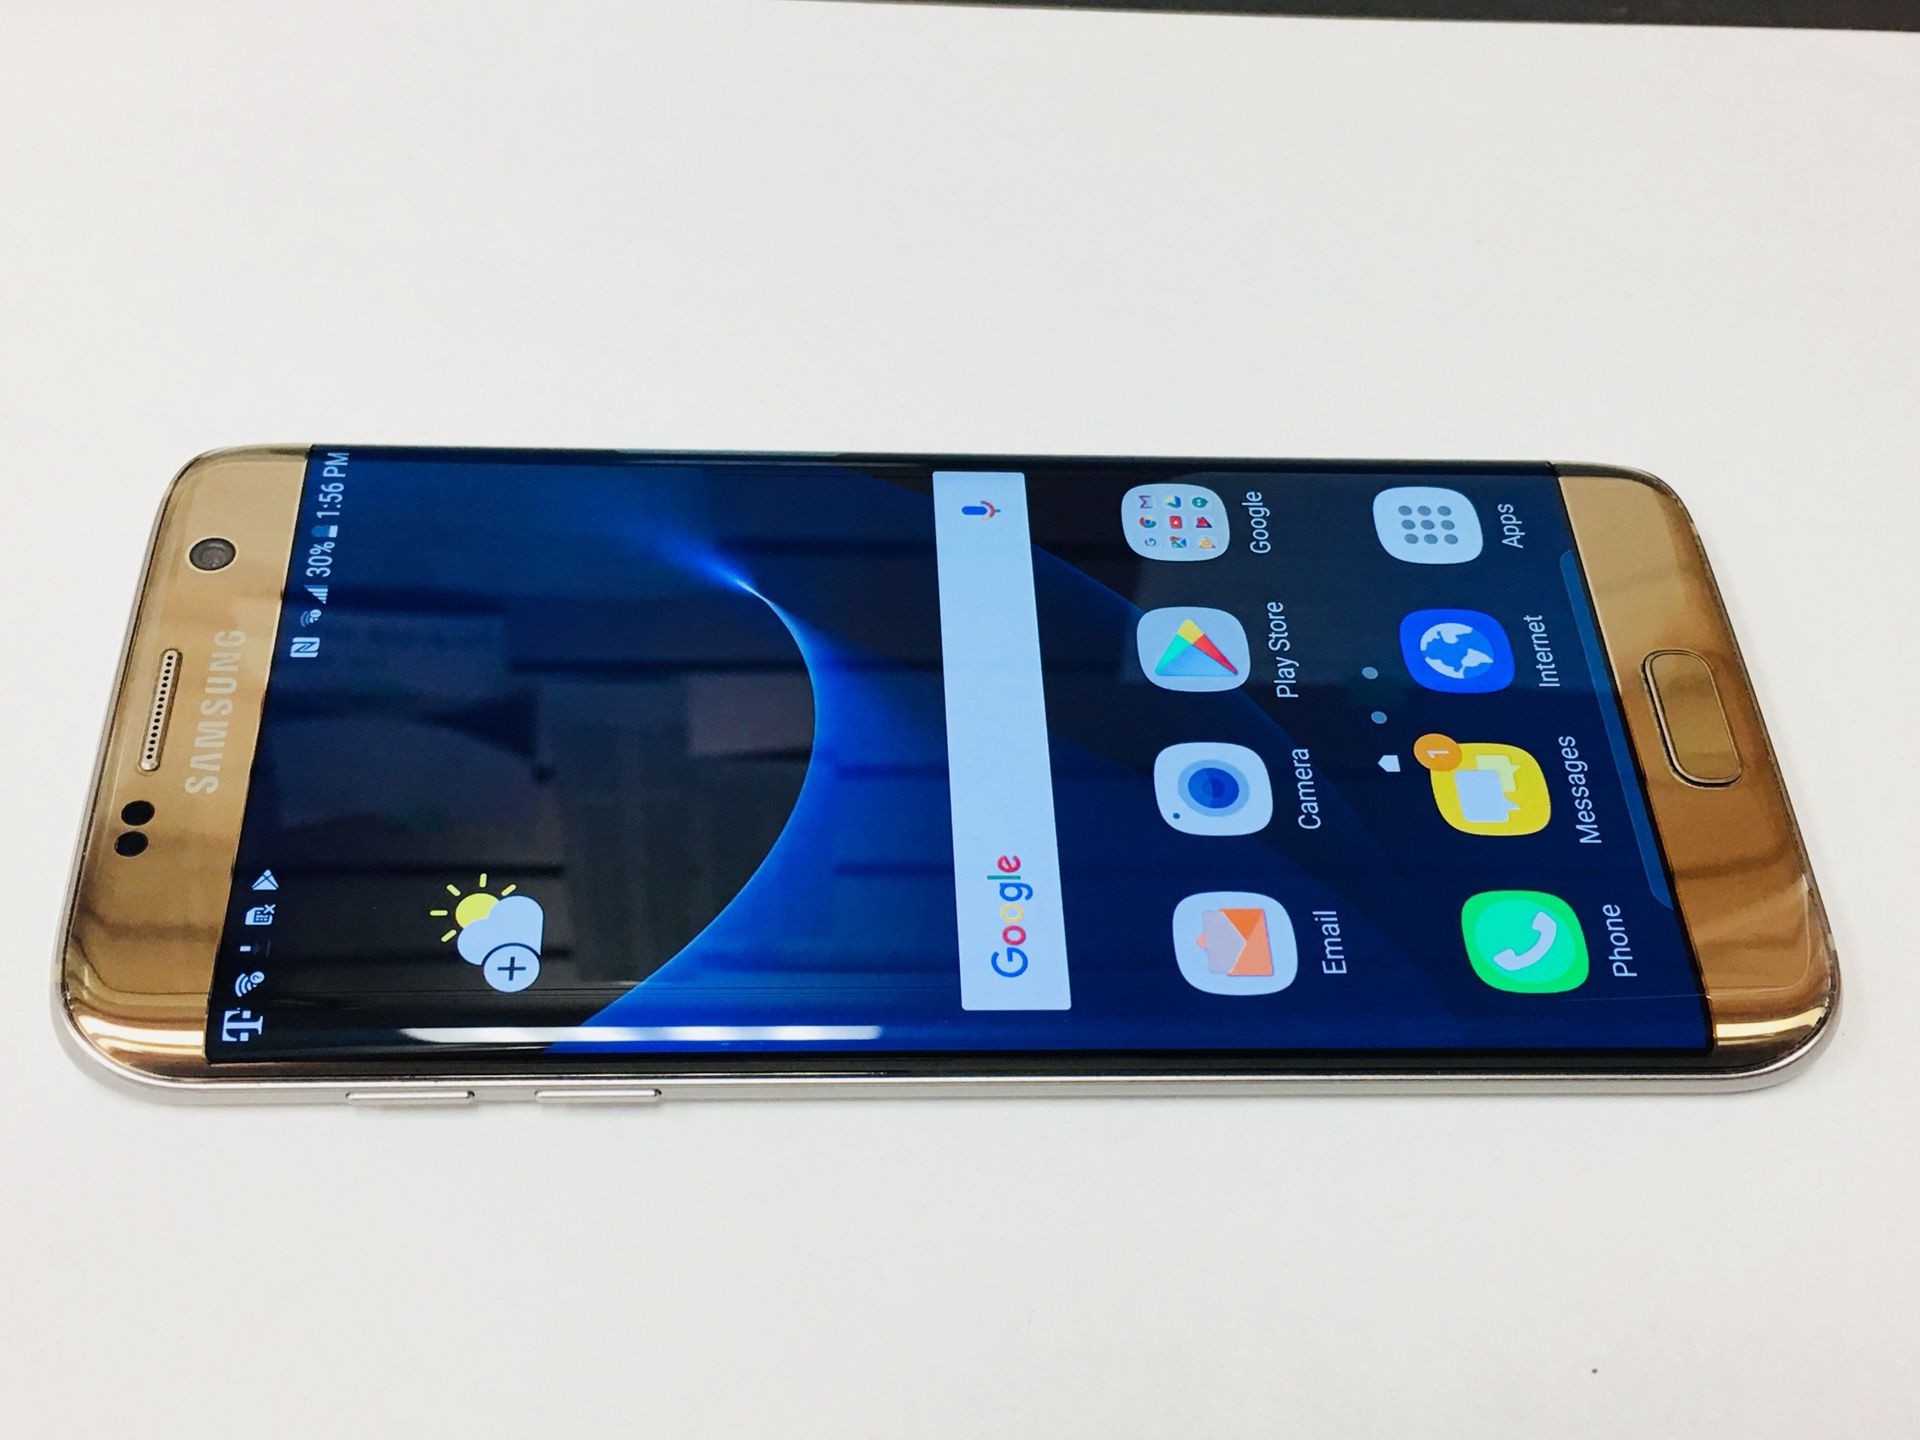 Unlocked Samsung Galaxy S7 Edge Gold. Works with Verizon, att, Tmobile, metro pcs and overseas. Comes with charger. Cash only, price is firm. 32